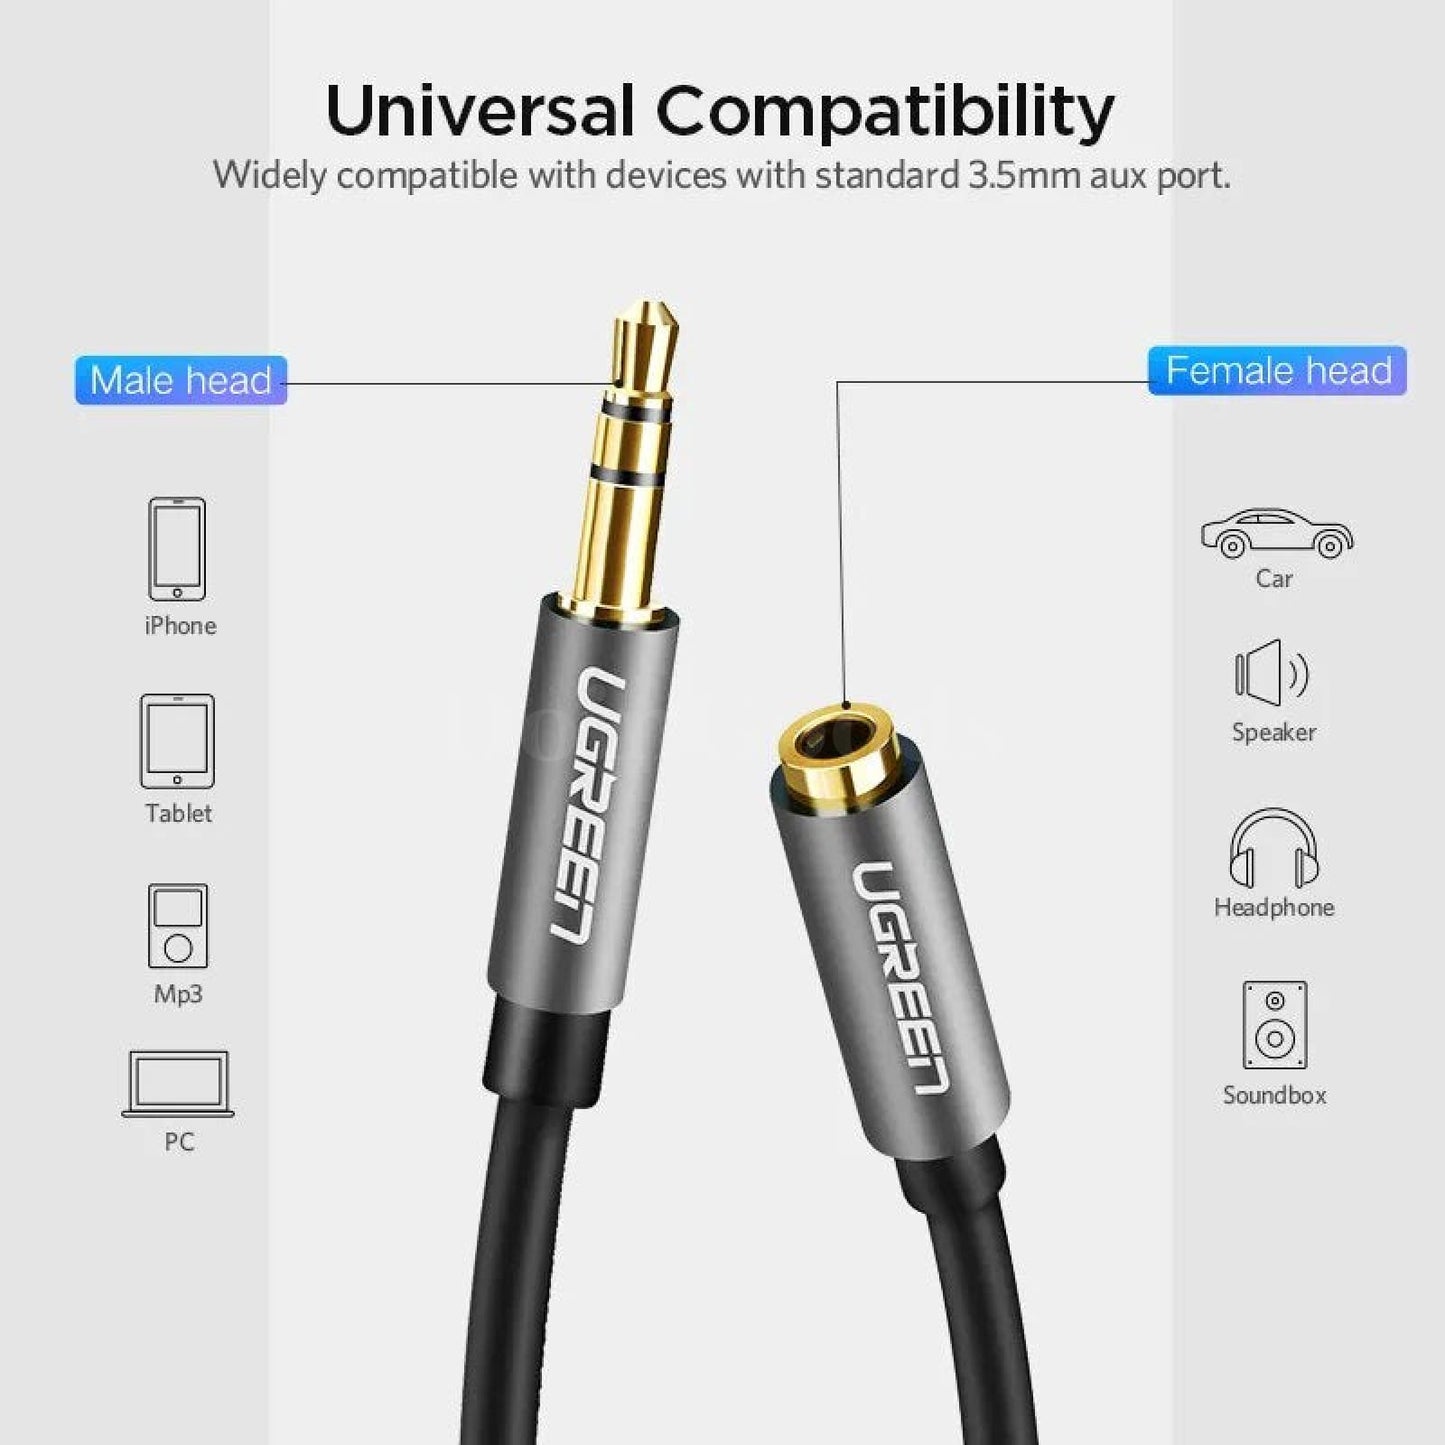 Ugreen 3.5Mm Male To Female Extension Audio Cable - Headphone And Aux 301635